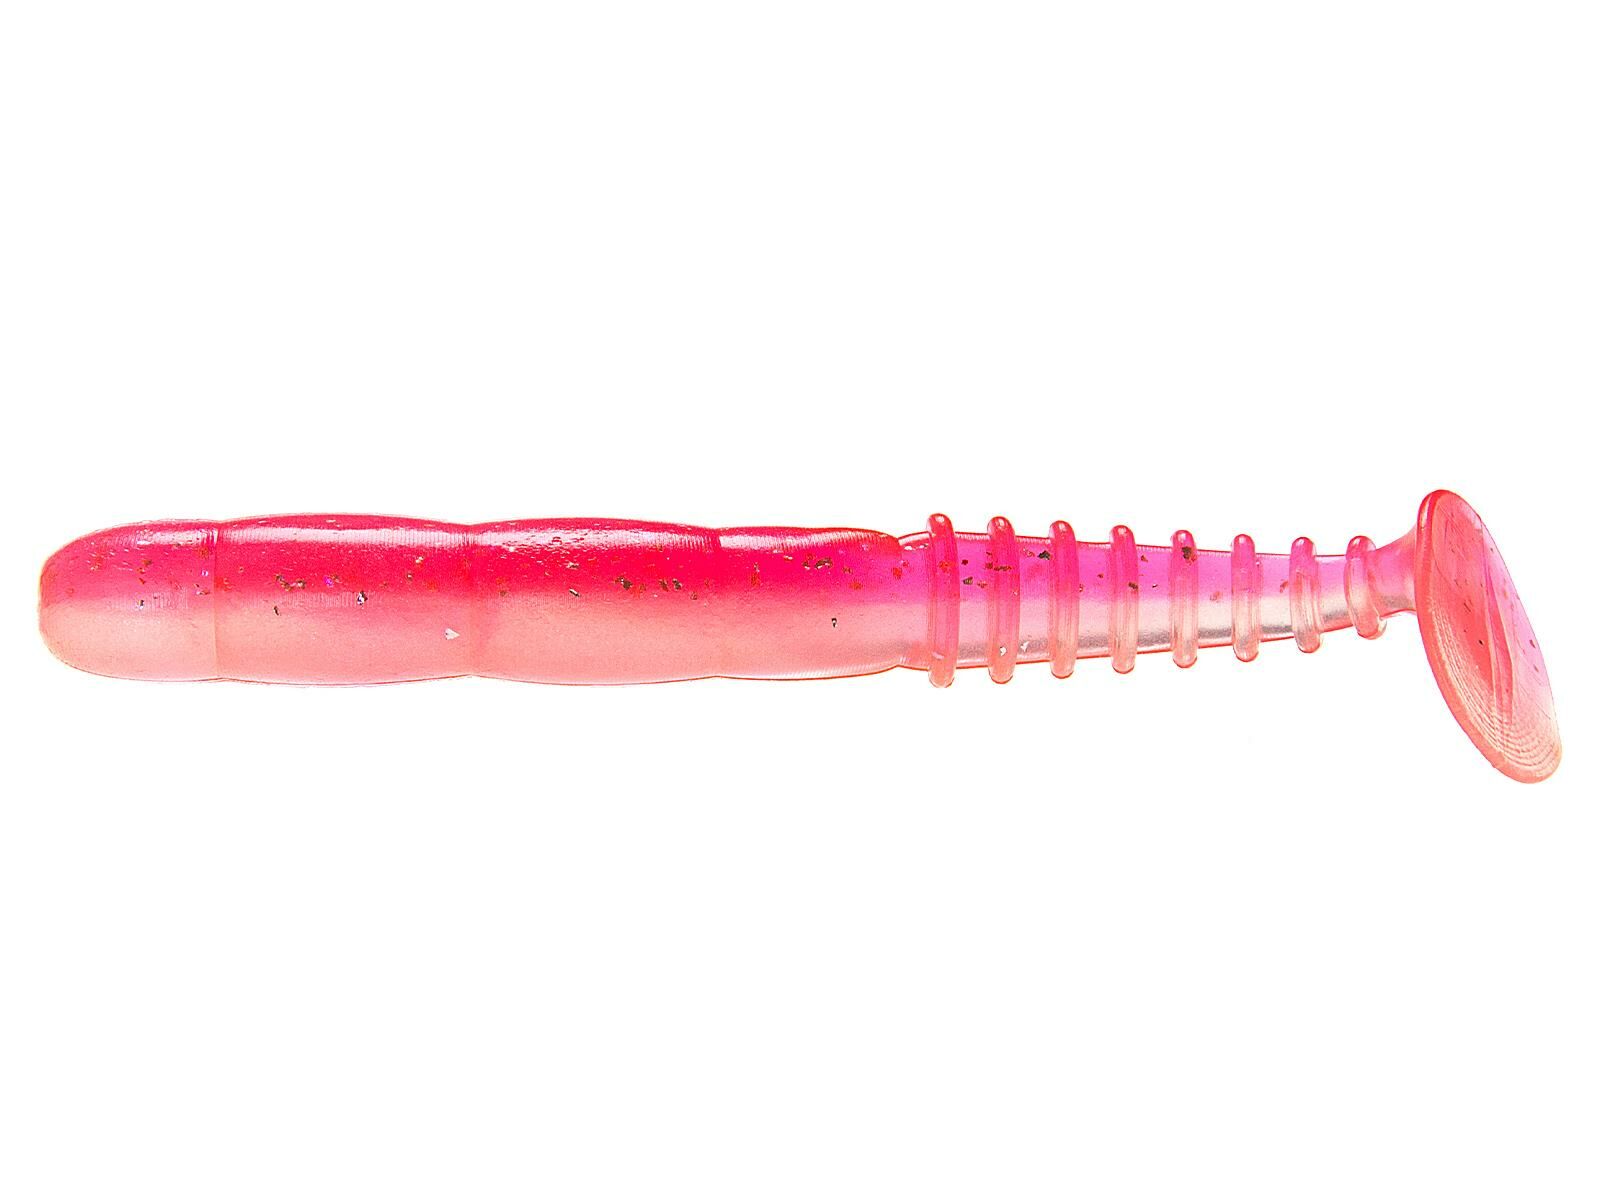 5" FAT Rockvibe Shad - Clear Pink